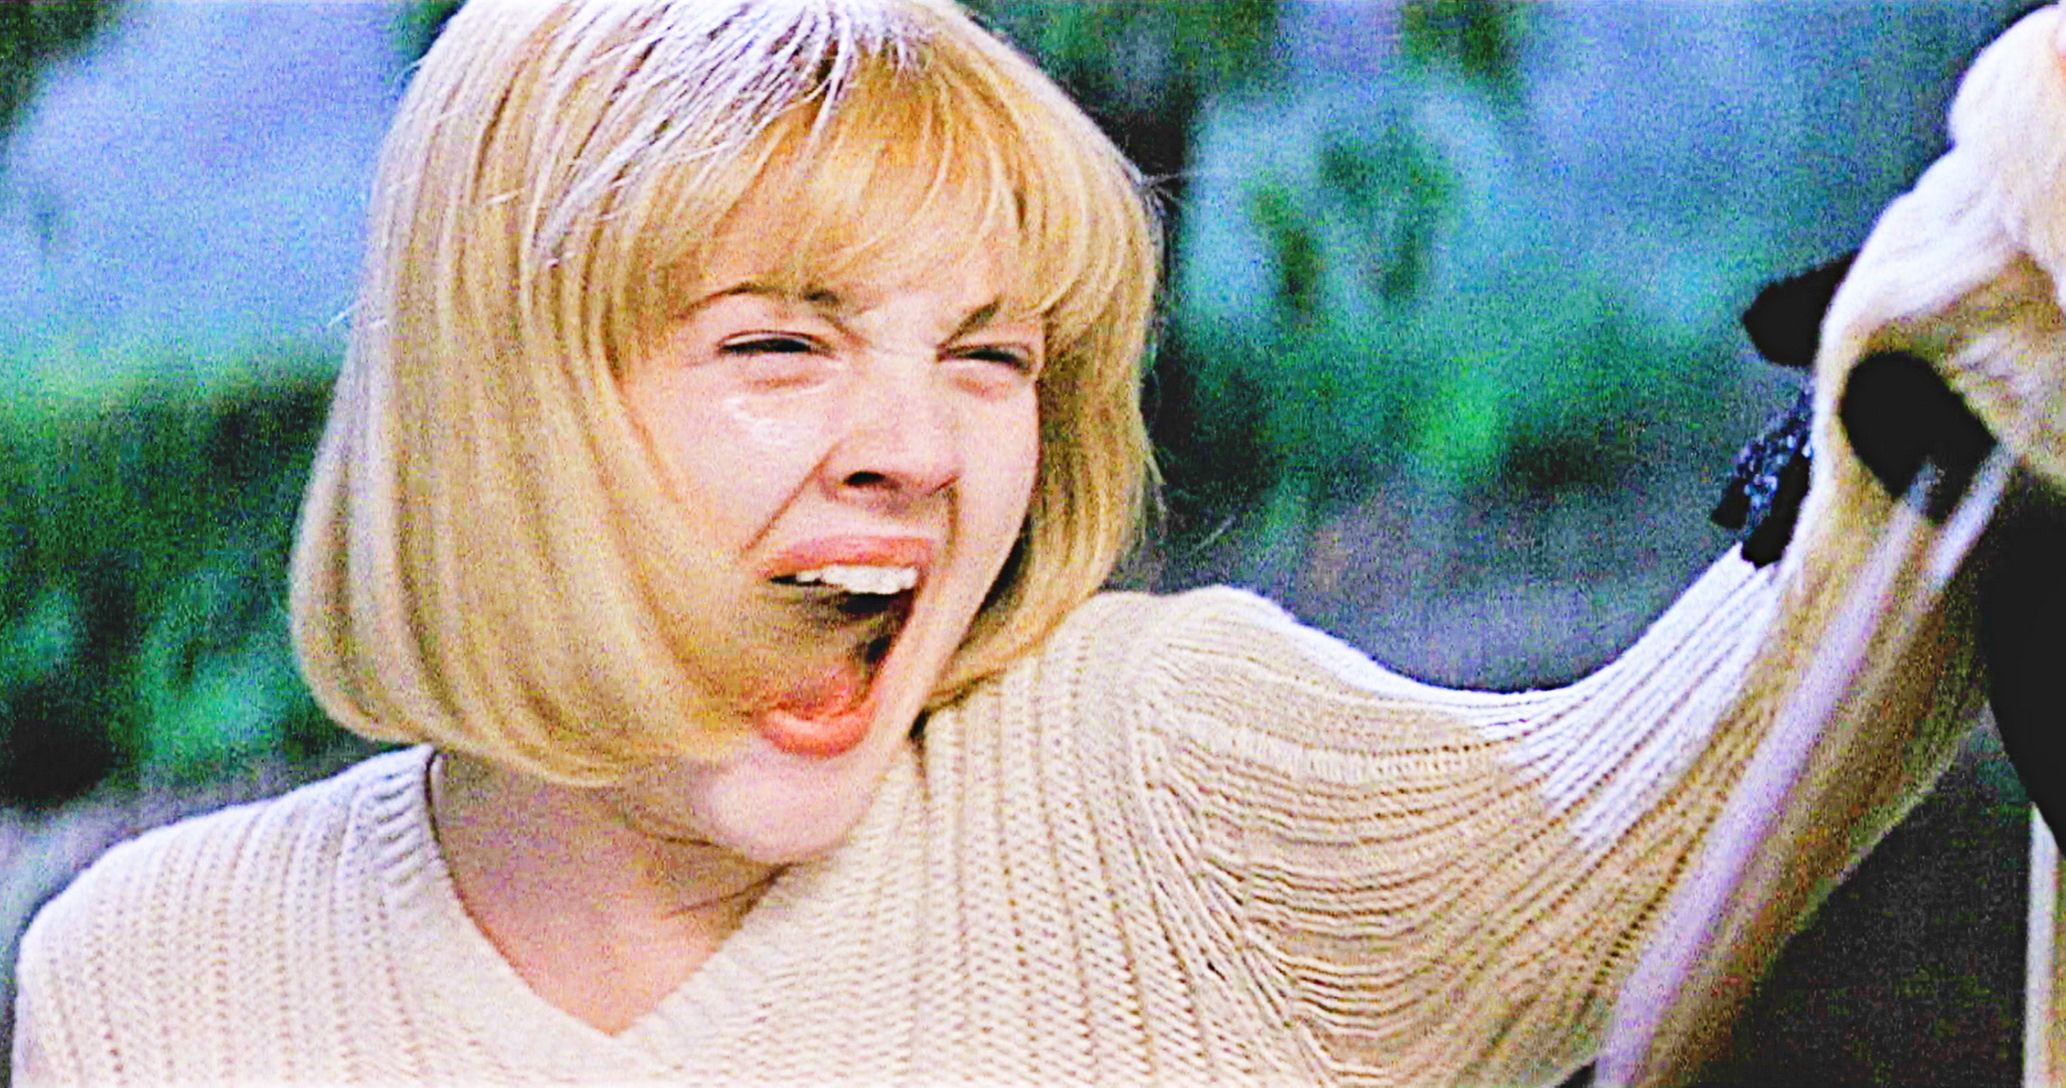 Drew Barrymore's Iconic Scream Scene Almost Got Wes Craven Fired